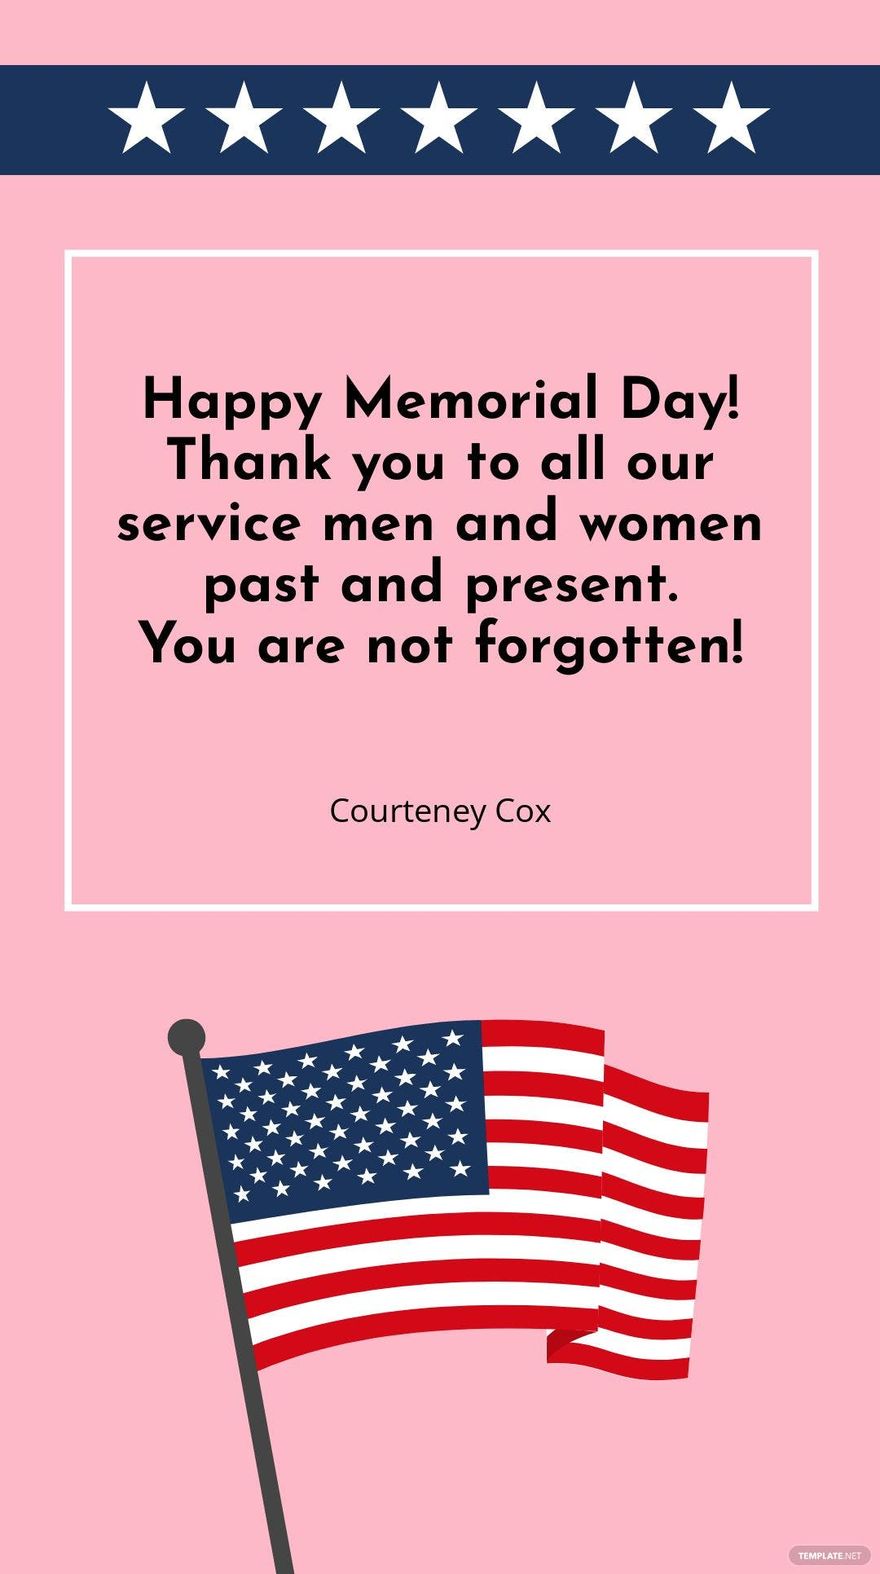 Courteney Cox - Happy Memorial Day! Thank you to all our service men and women past and present. You are not forgotten! Template